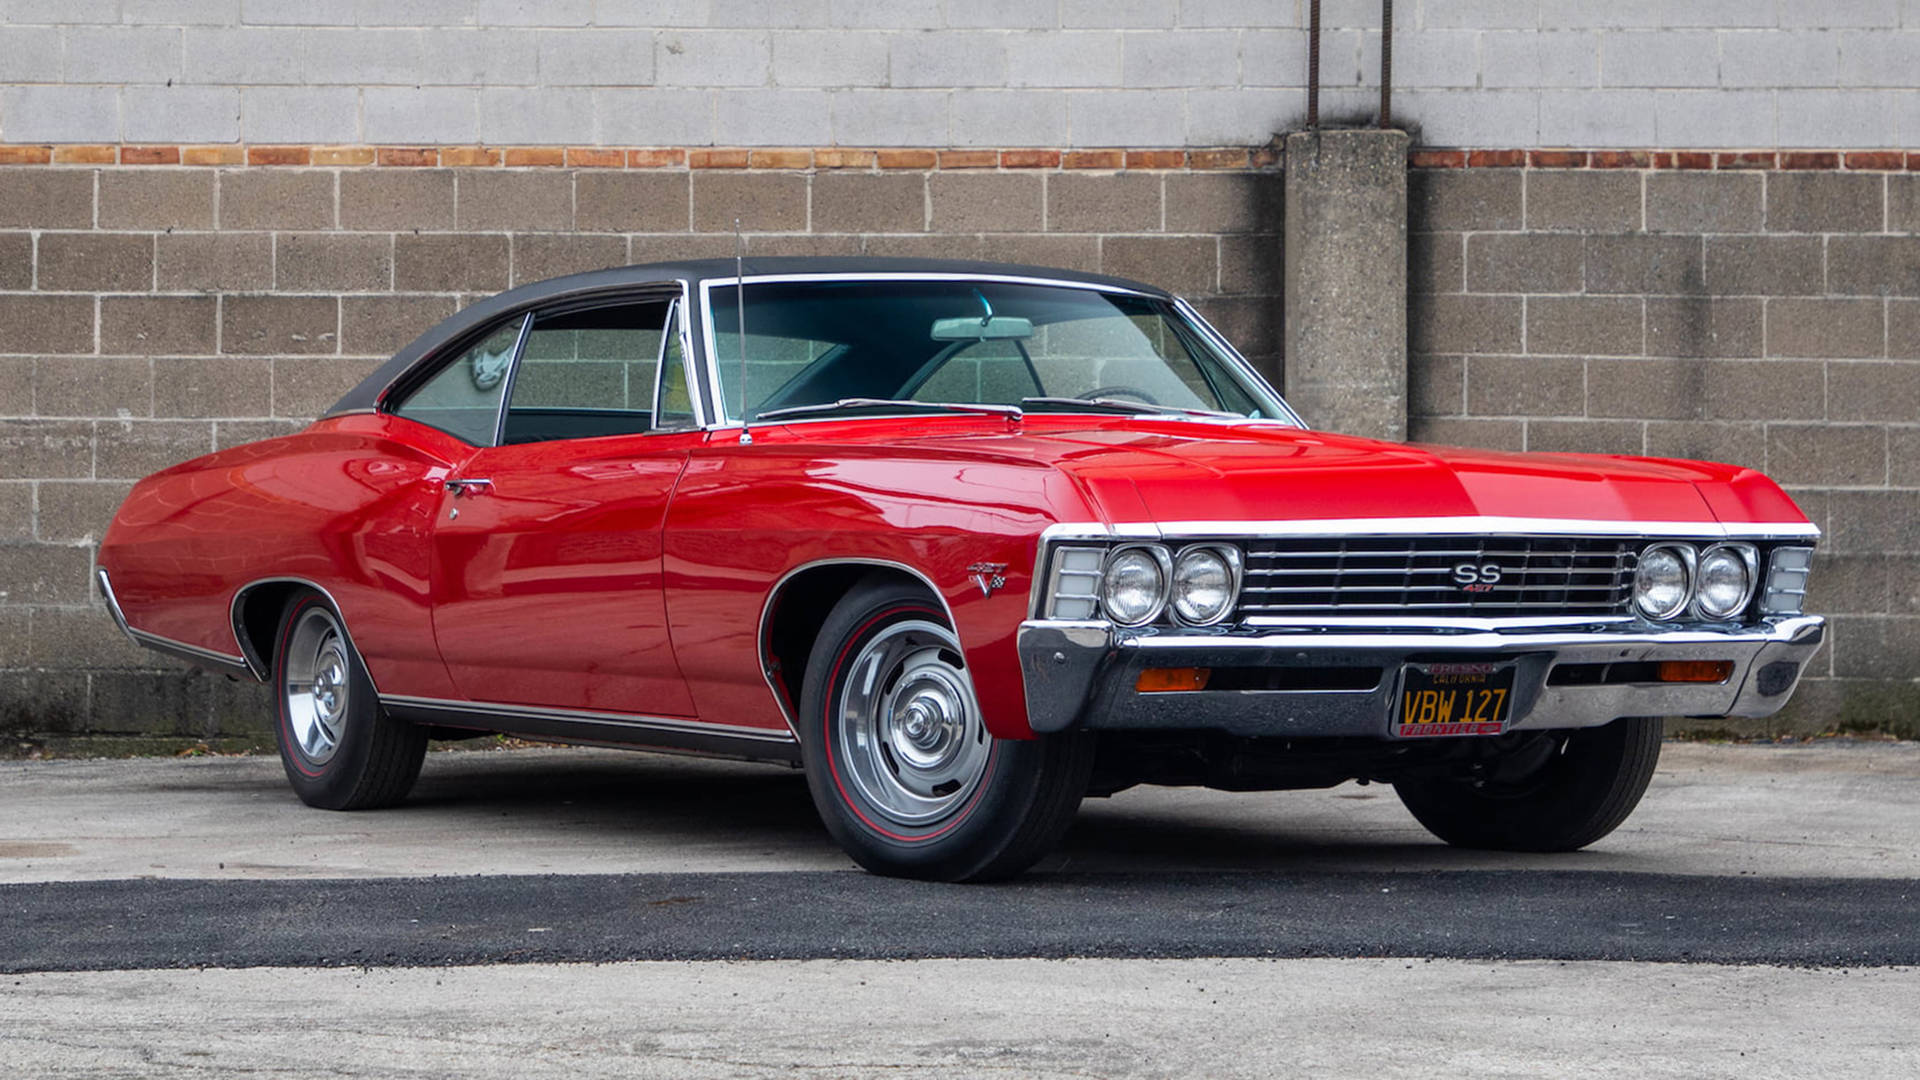 Classic Perfection - Red 1967 Chevrolet Impala Wallpaper